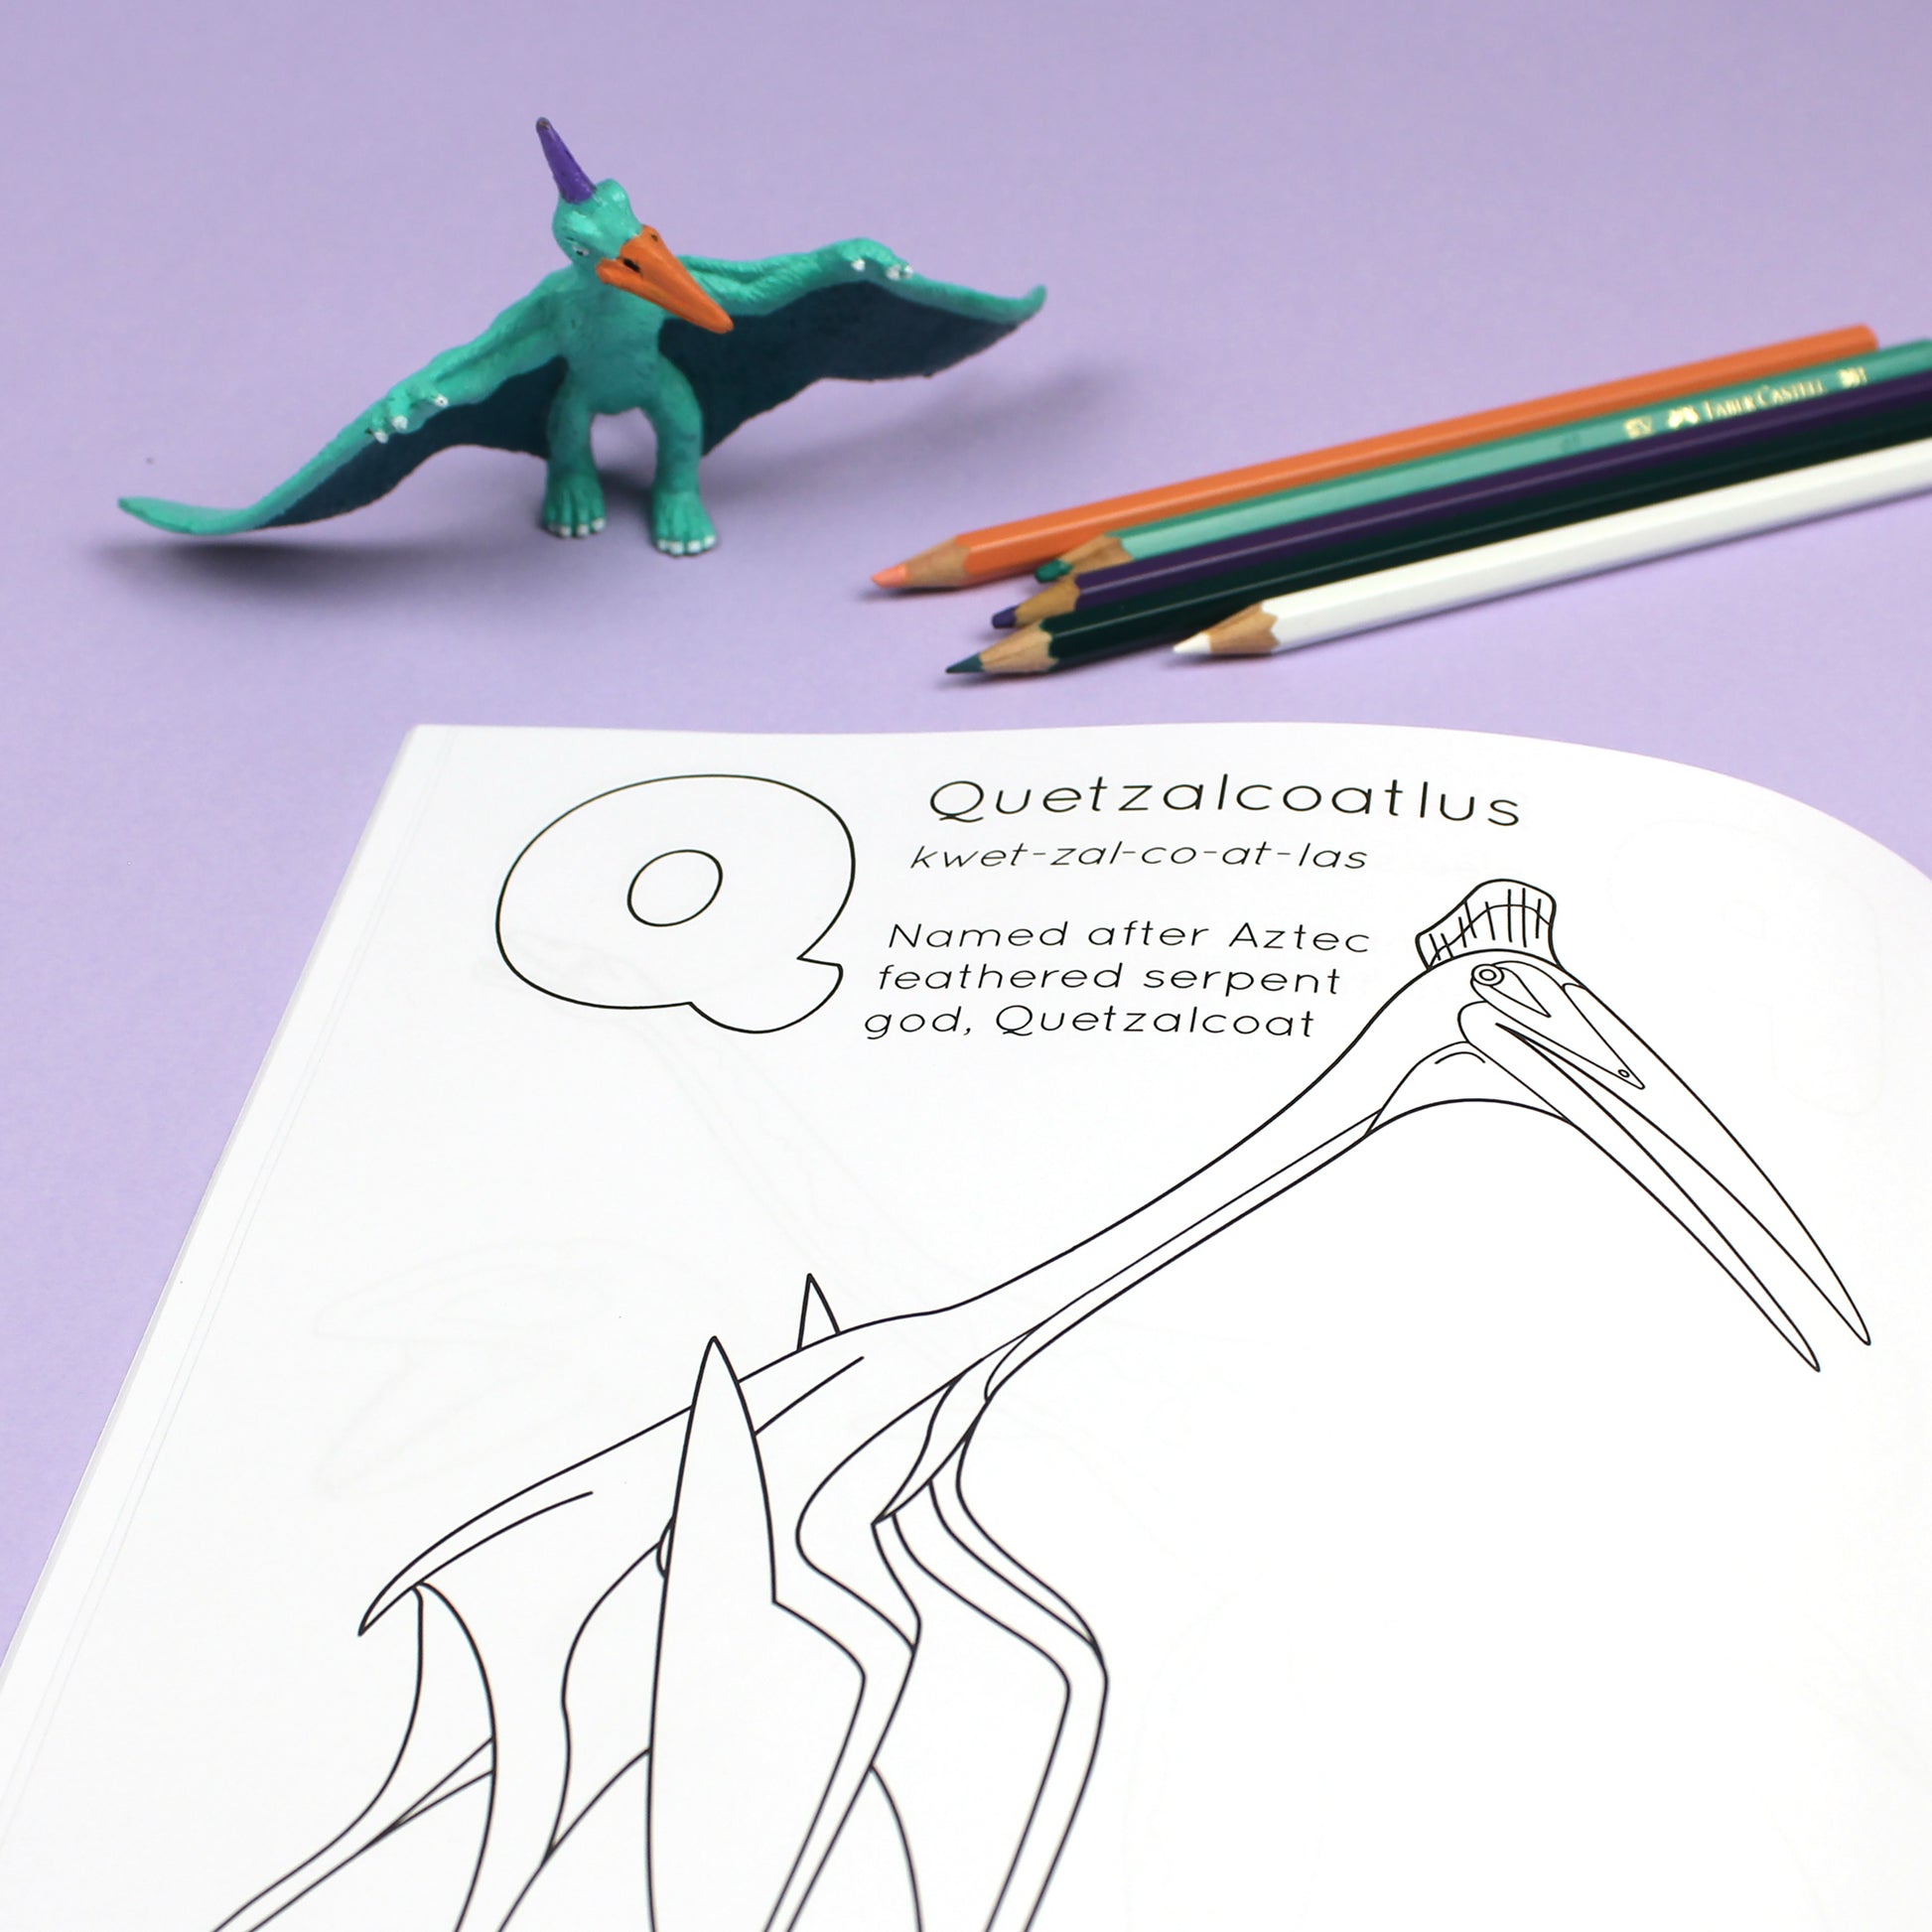 Inside page of ABC Dinosaur colouring book. The page features black line illustration of a Quetzalcoatlus dinosaur with its name, pronunciation and meaning above it.